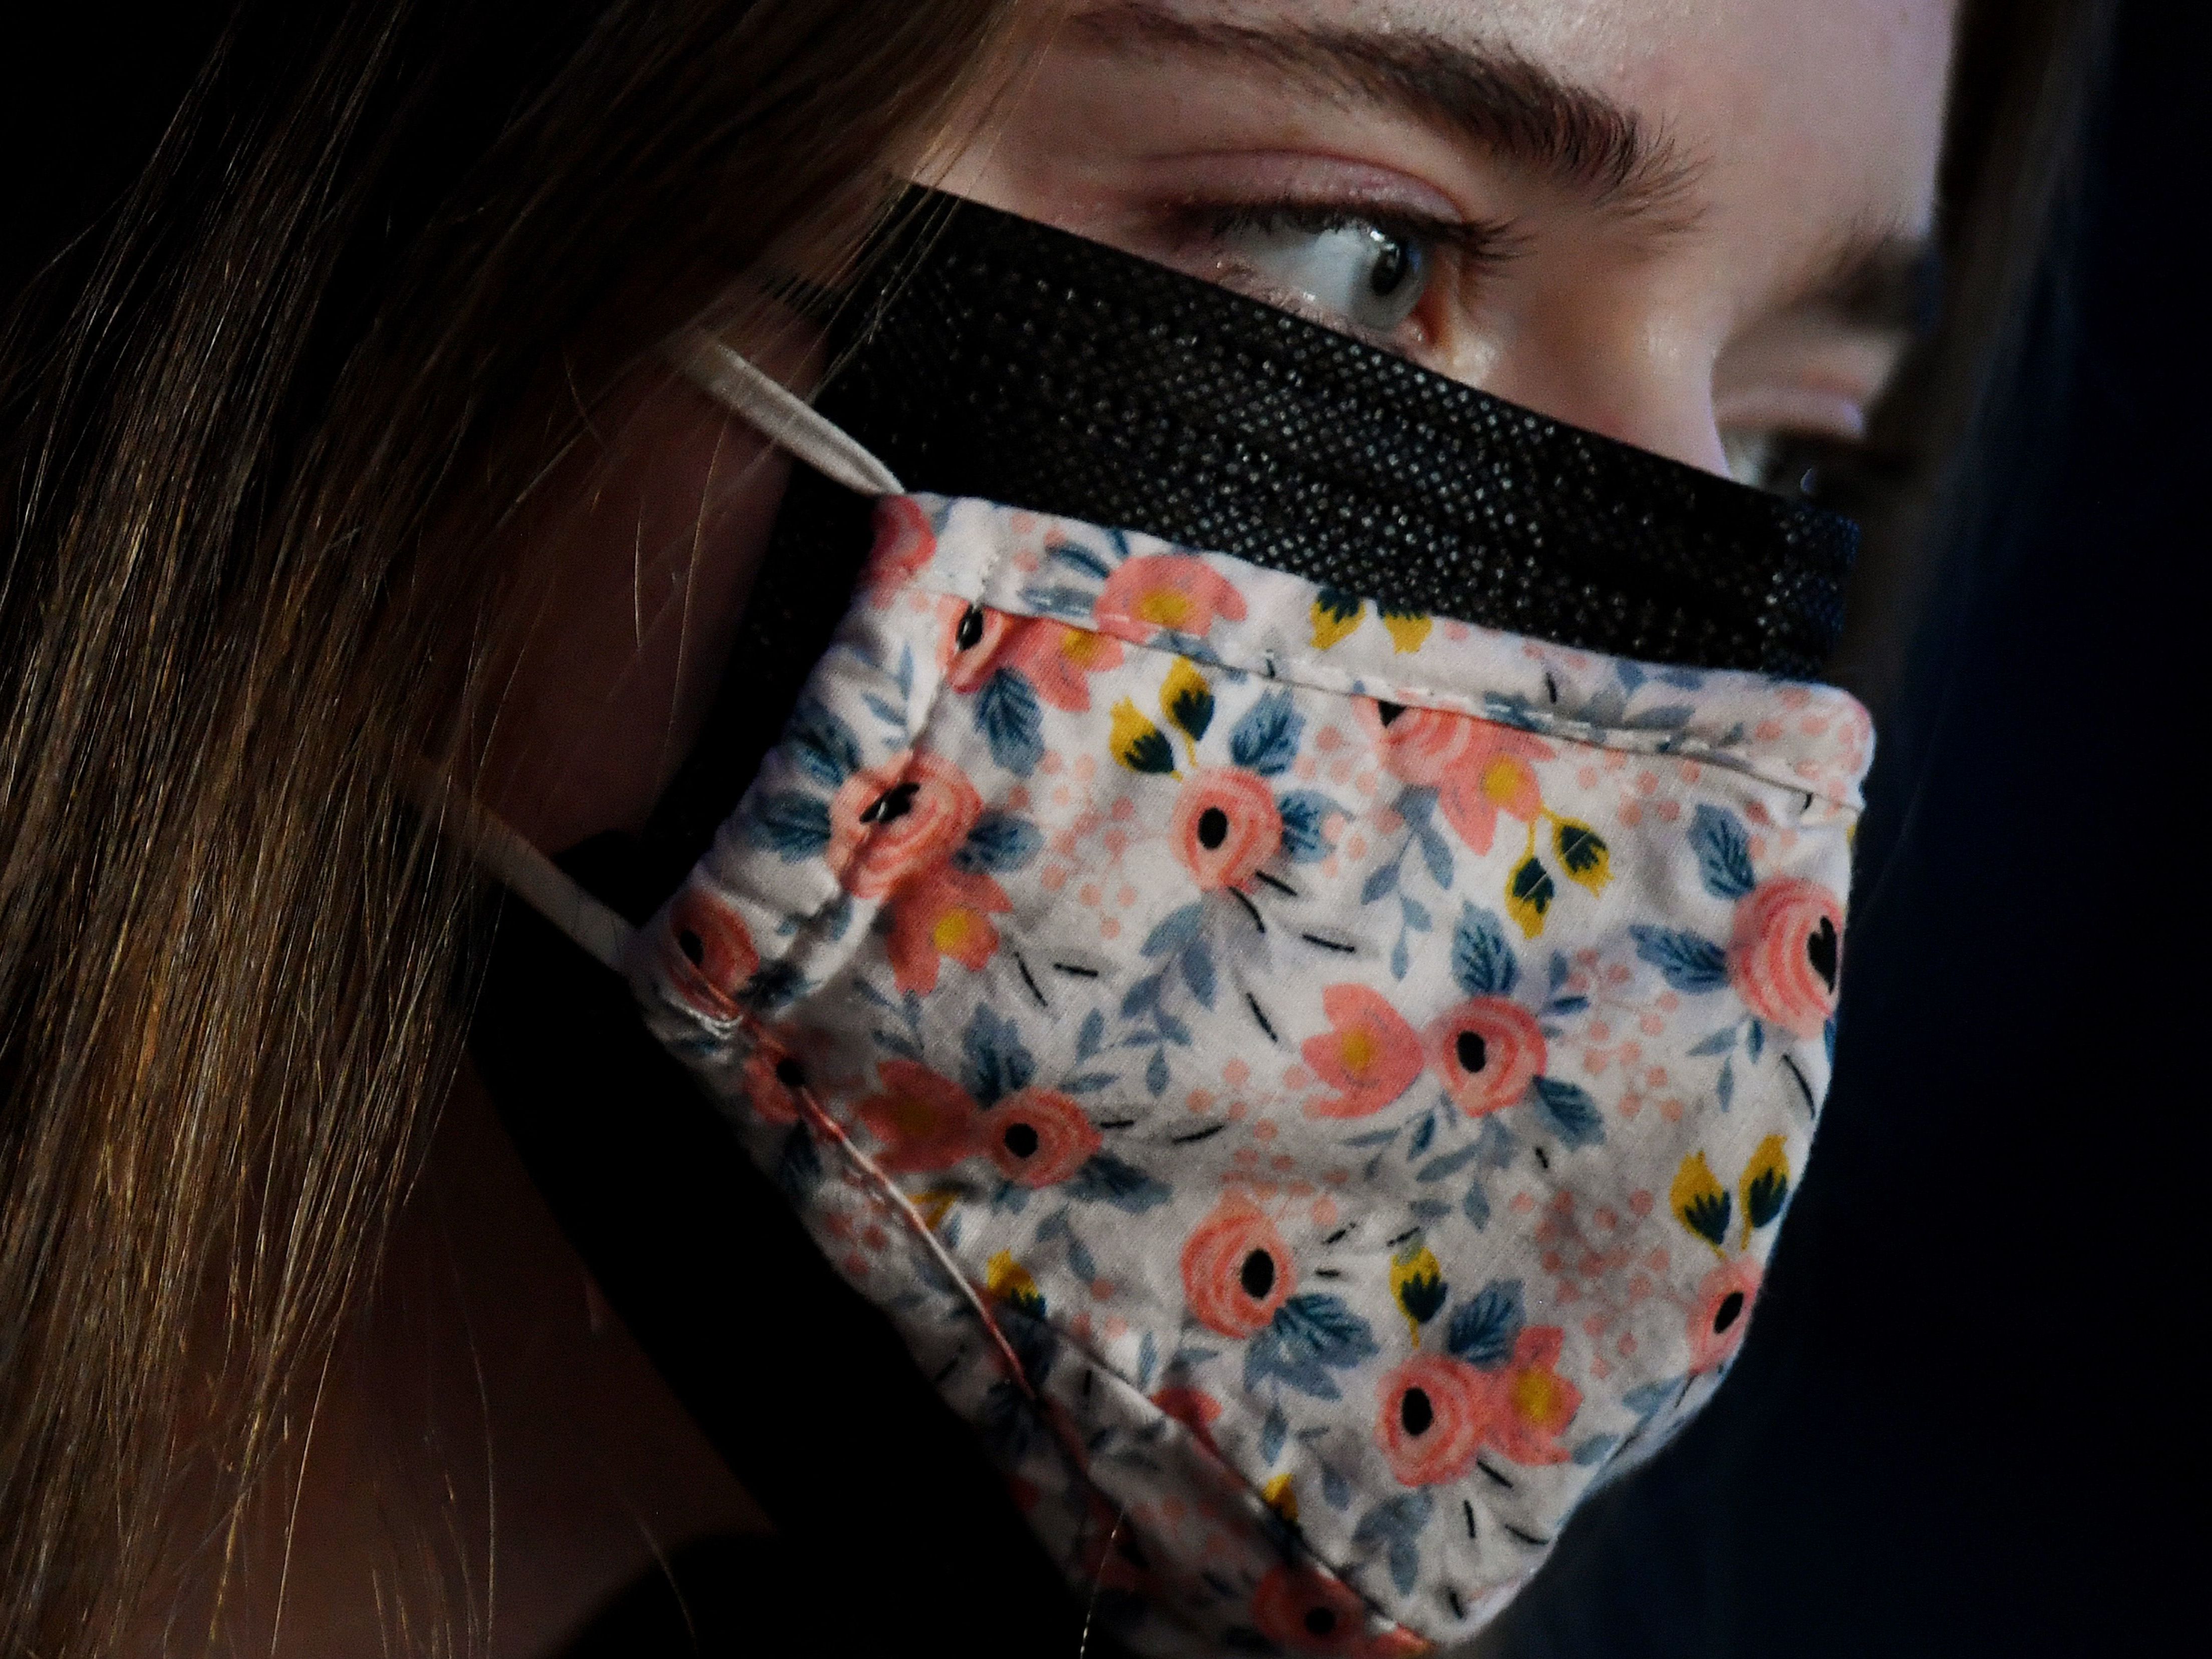 As new, more This illustration shows a woman wearing two facemasks, a cloth mask over a surgical mask, in Arlington, Virginia, on February 8, 2021. - As new, more transmissible variants of the coronavirus spread, experts say it's time to consider using a medical-grade respirator, or wearing a surgical and cloth mask together. Scientists have agreed for some time the main way the virus is spread is through the air, rather than surfaces, and there's growing evidence that small droplets from ordinary breathing and speech that can travel many meters (yards) are a common mode of transmission. (Photo by OLIVIER DOULIERY / AFP) (Photo by OLIVIER DOULIERY/AFP via Getty Images)transmissible variants of the coronavirus spread, the CDC says wearing a cloth mask over a surgical mask offers increased protection against the virus. Olivier Douliery/AFP via Getty Images